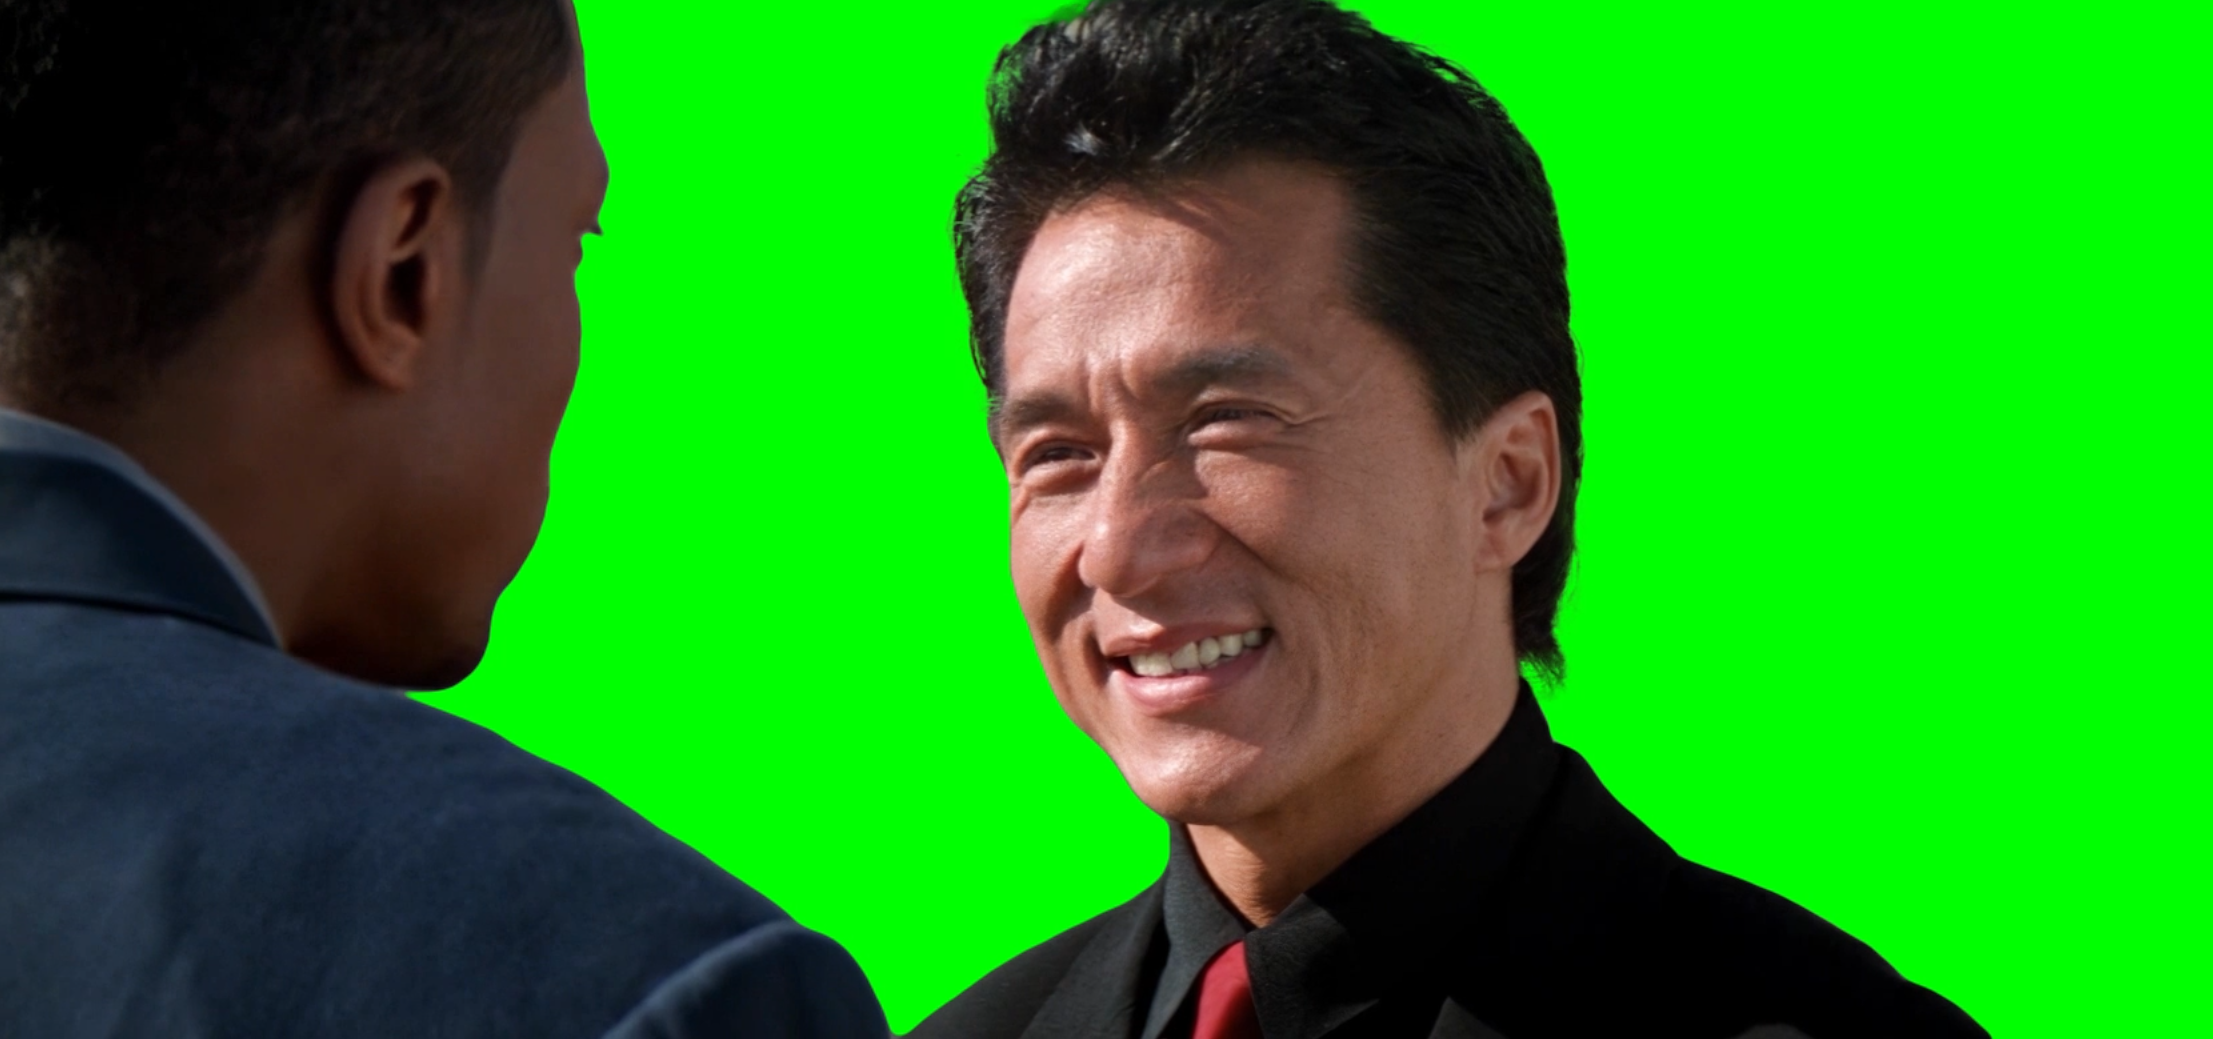 Rush Hour - Do you understand the words that are coming out of my mouth? (Green Screen)